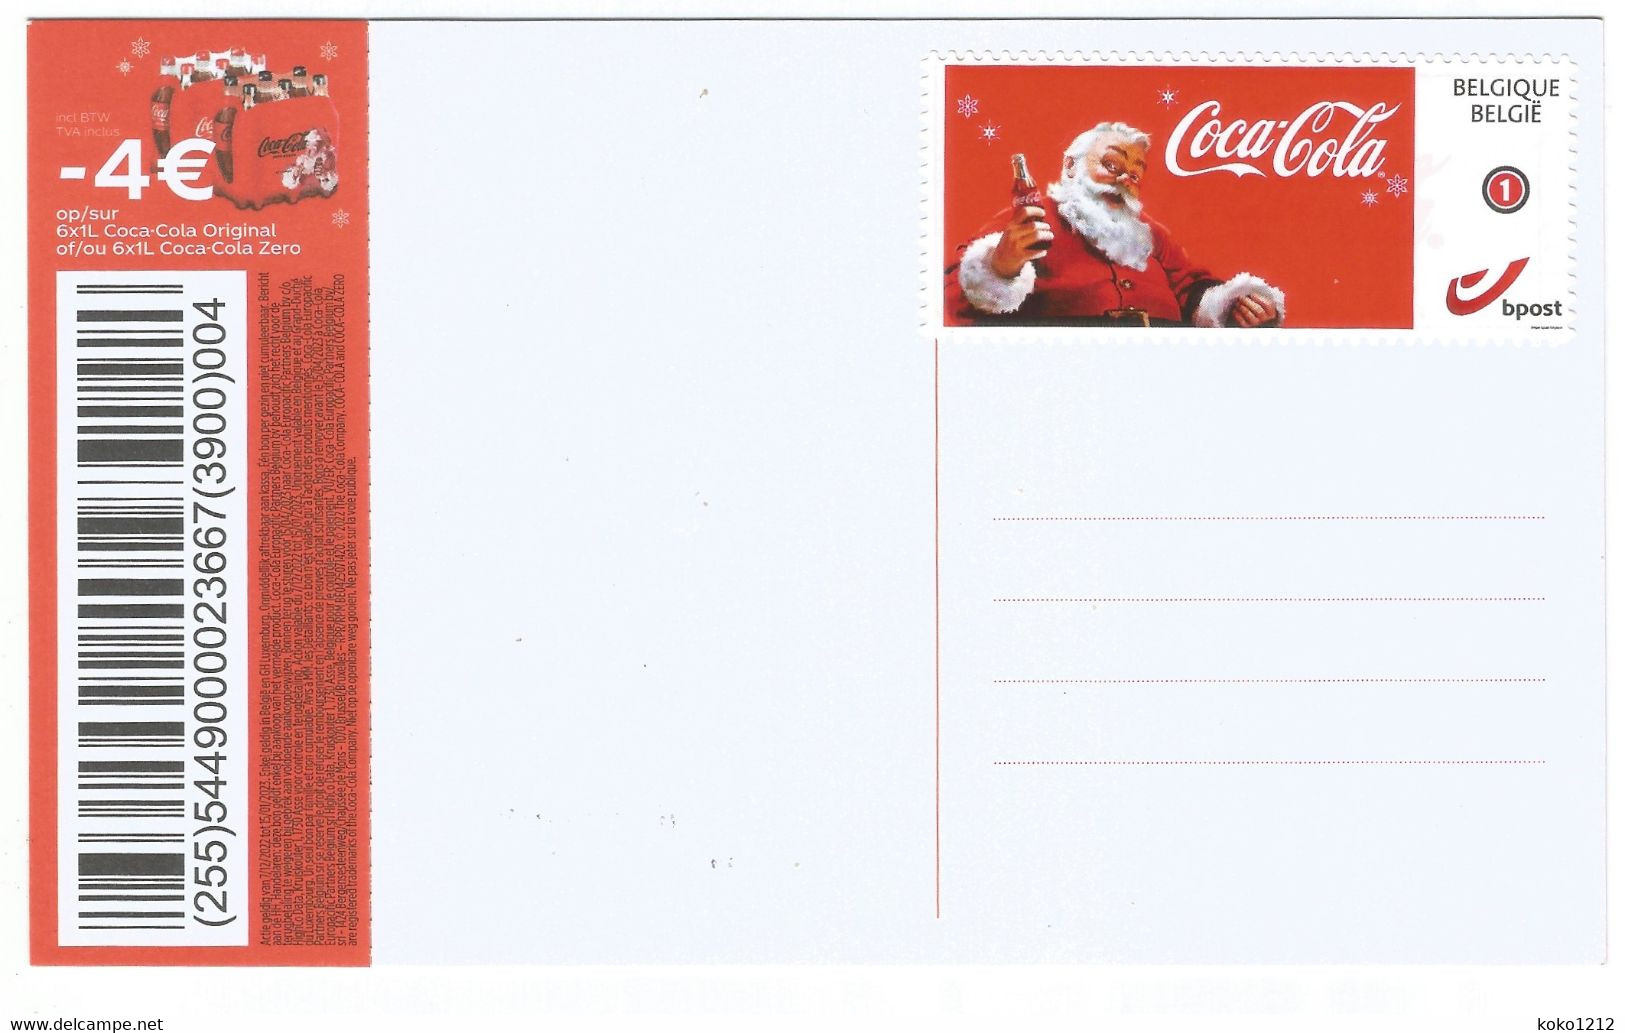 RARE CocaCola Belgium Postcard (1/2) With Private Stamp CocaCola NEUF - Covers & Documents